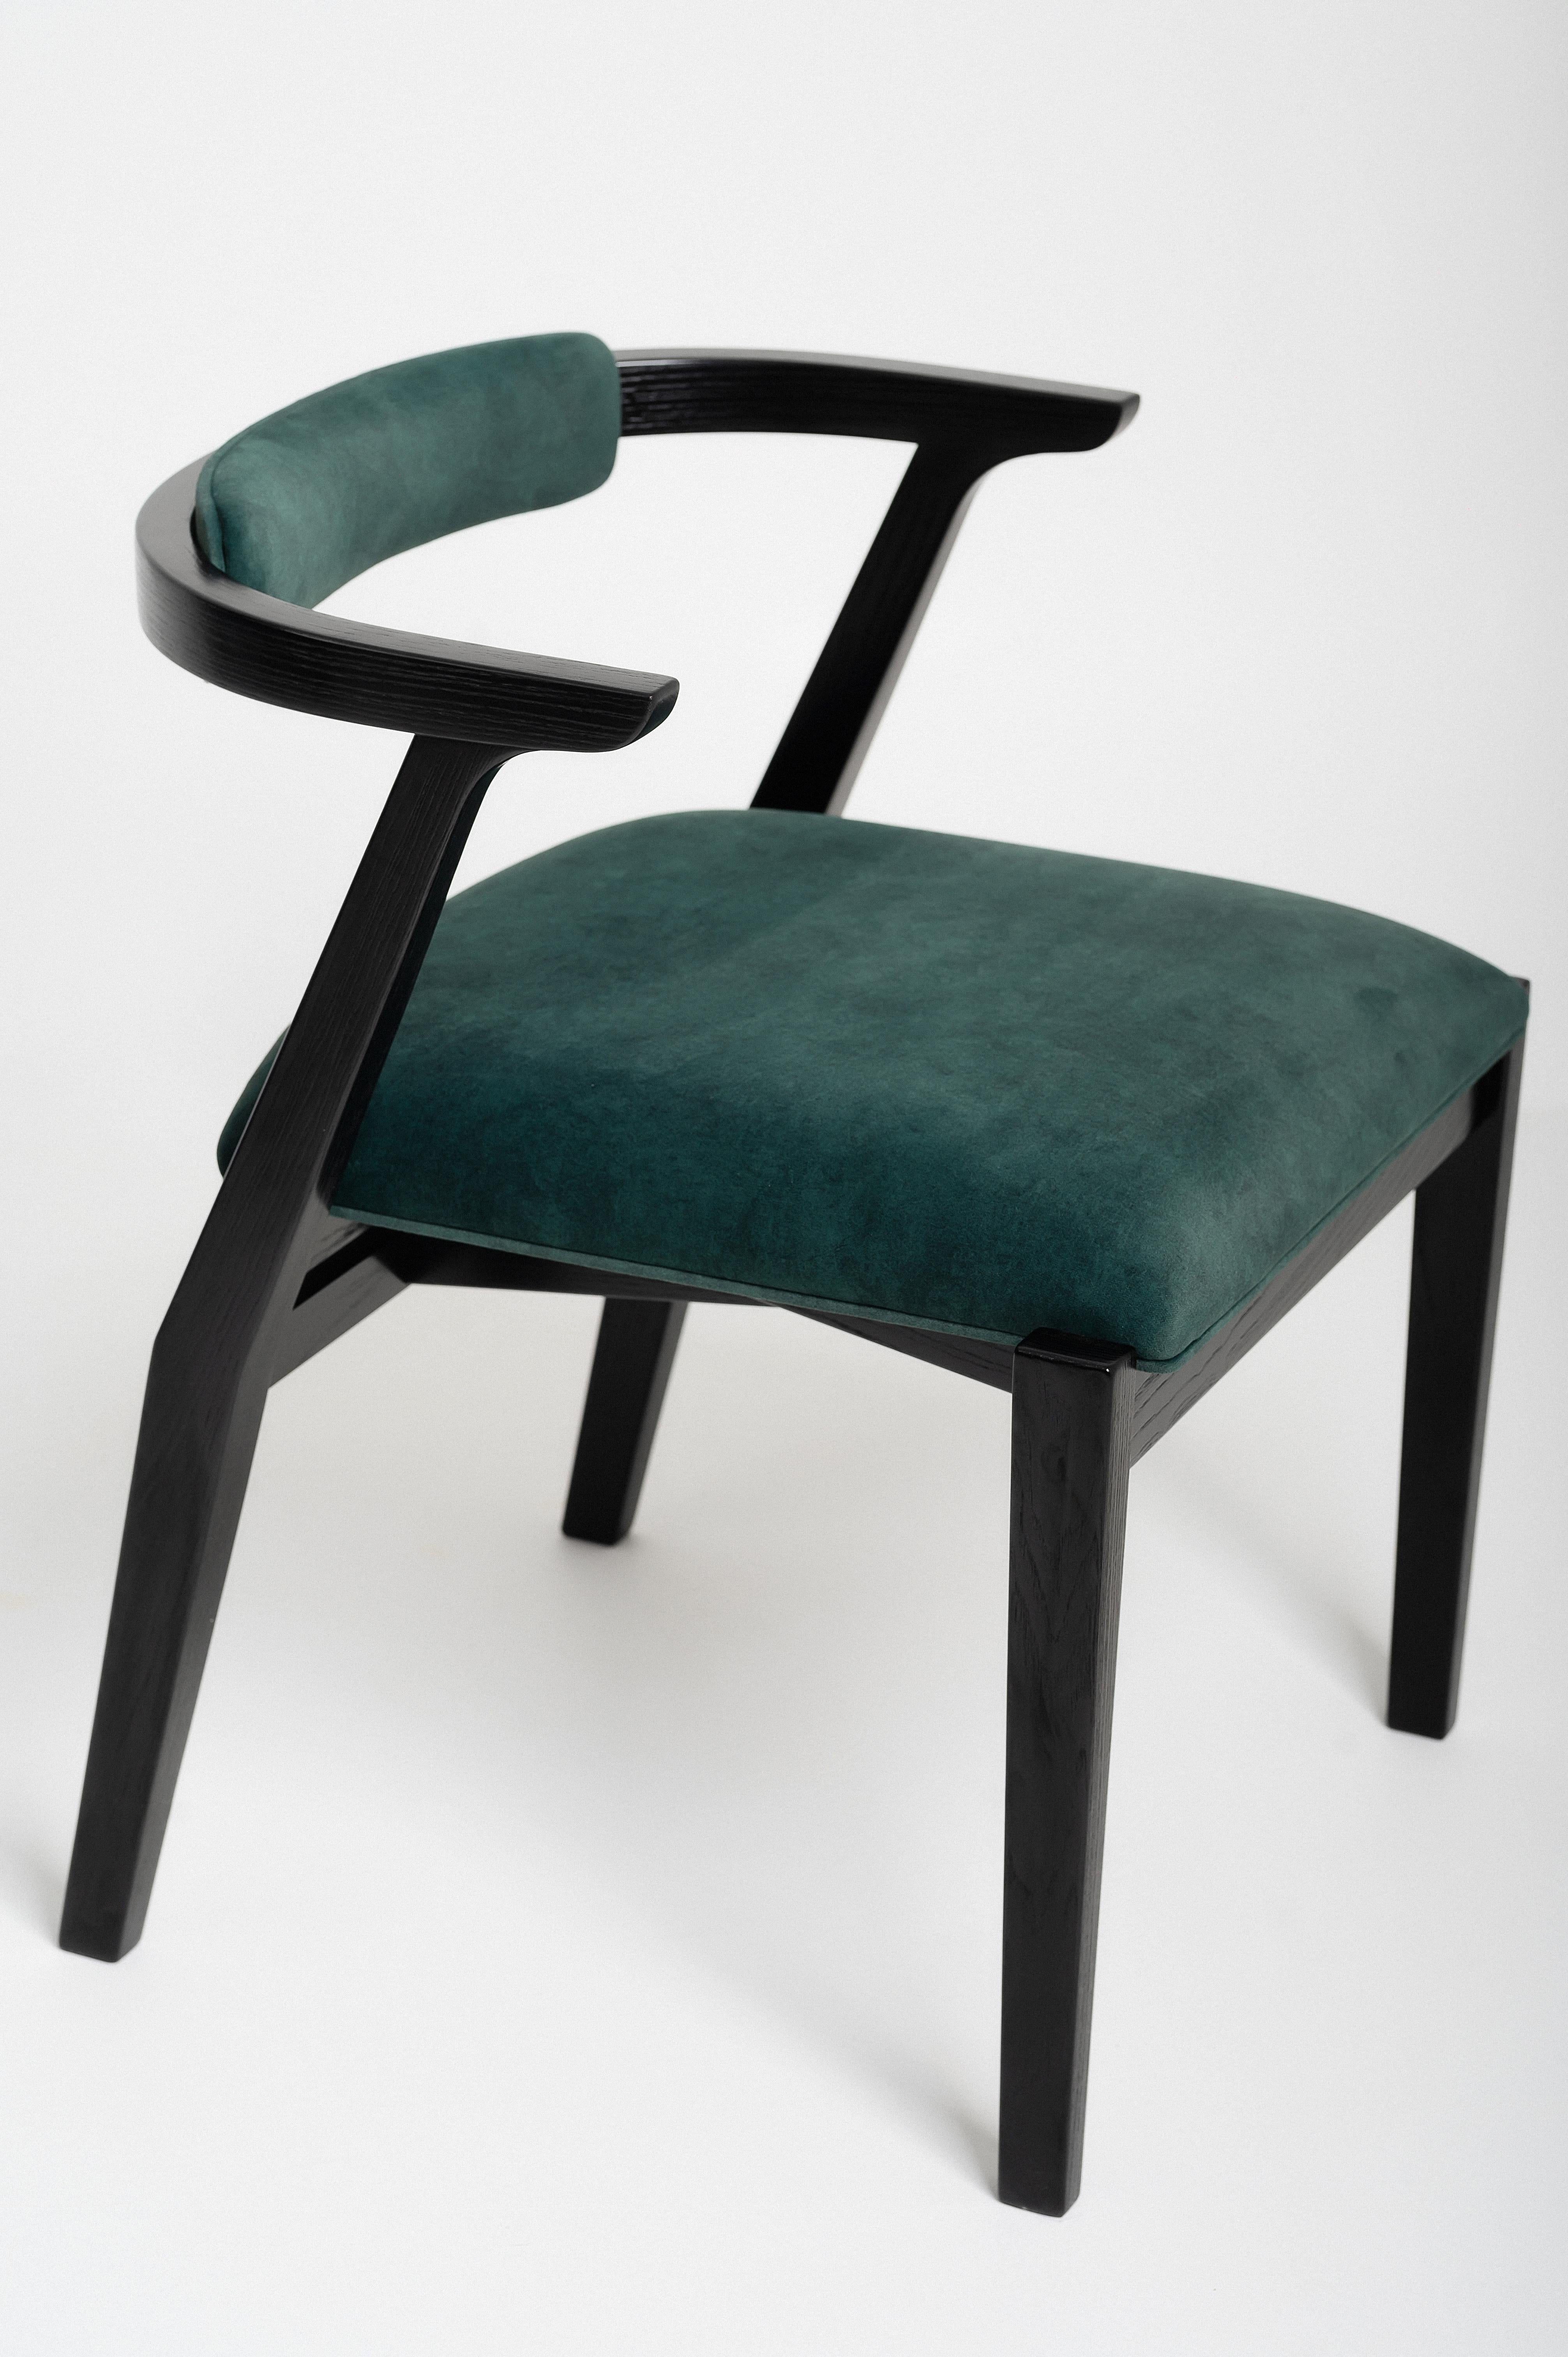 Moldovan Modern Dining Room Chairs in Black Solid Wood and Emerald Material For Sale